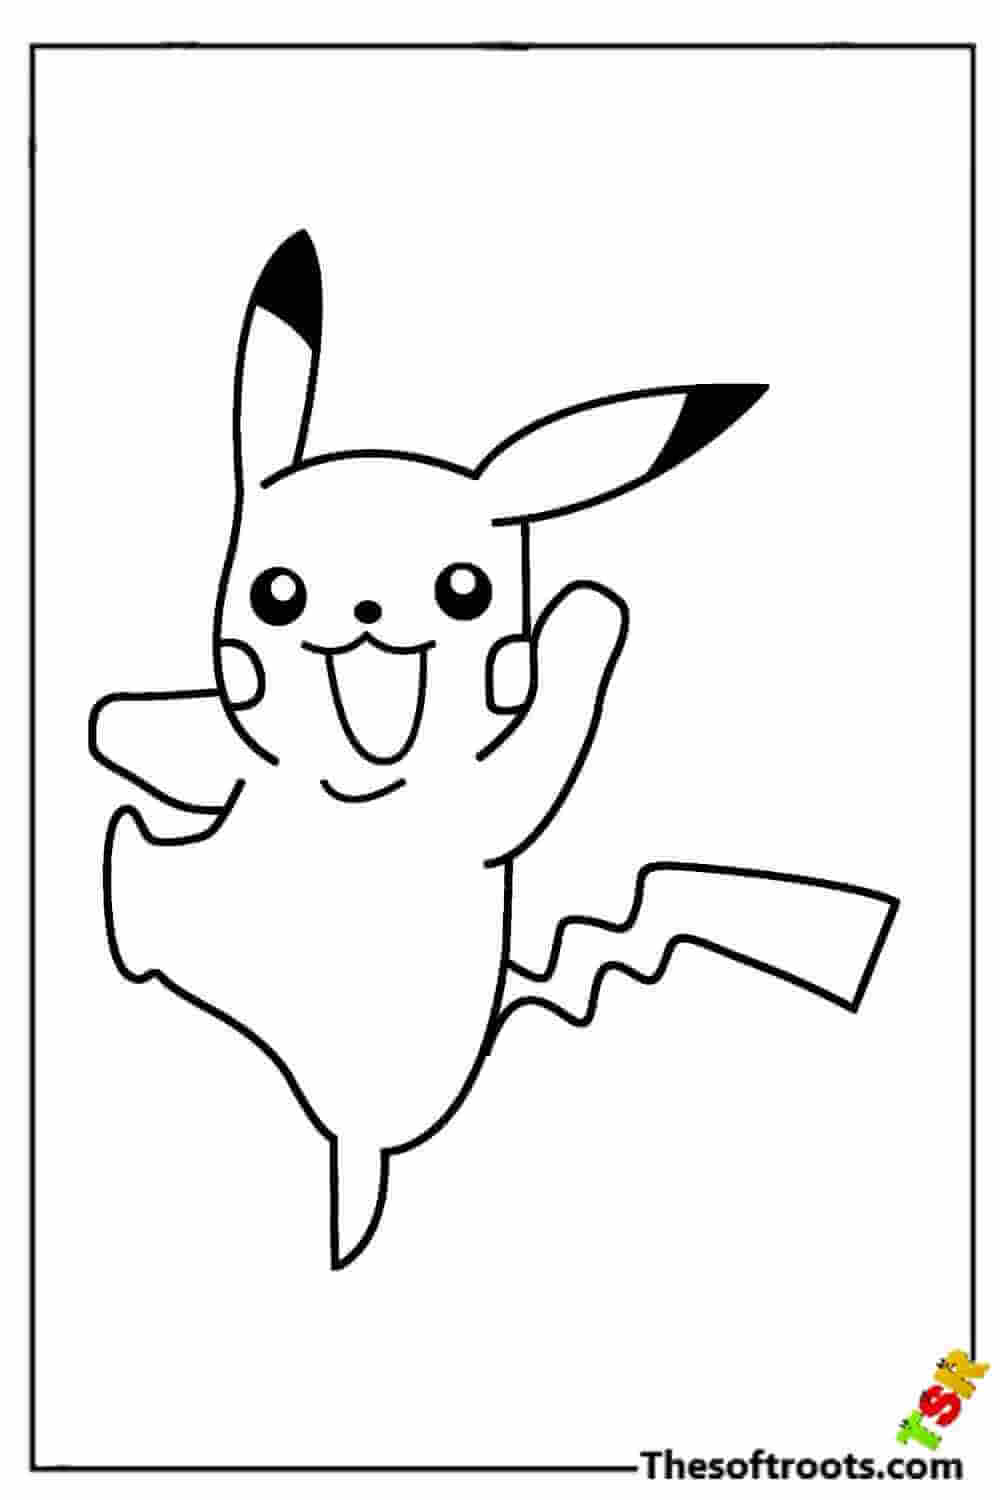 Jumping Pikachu coloring pages